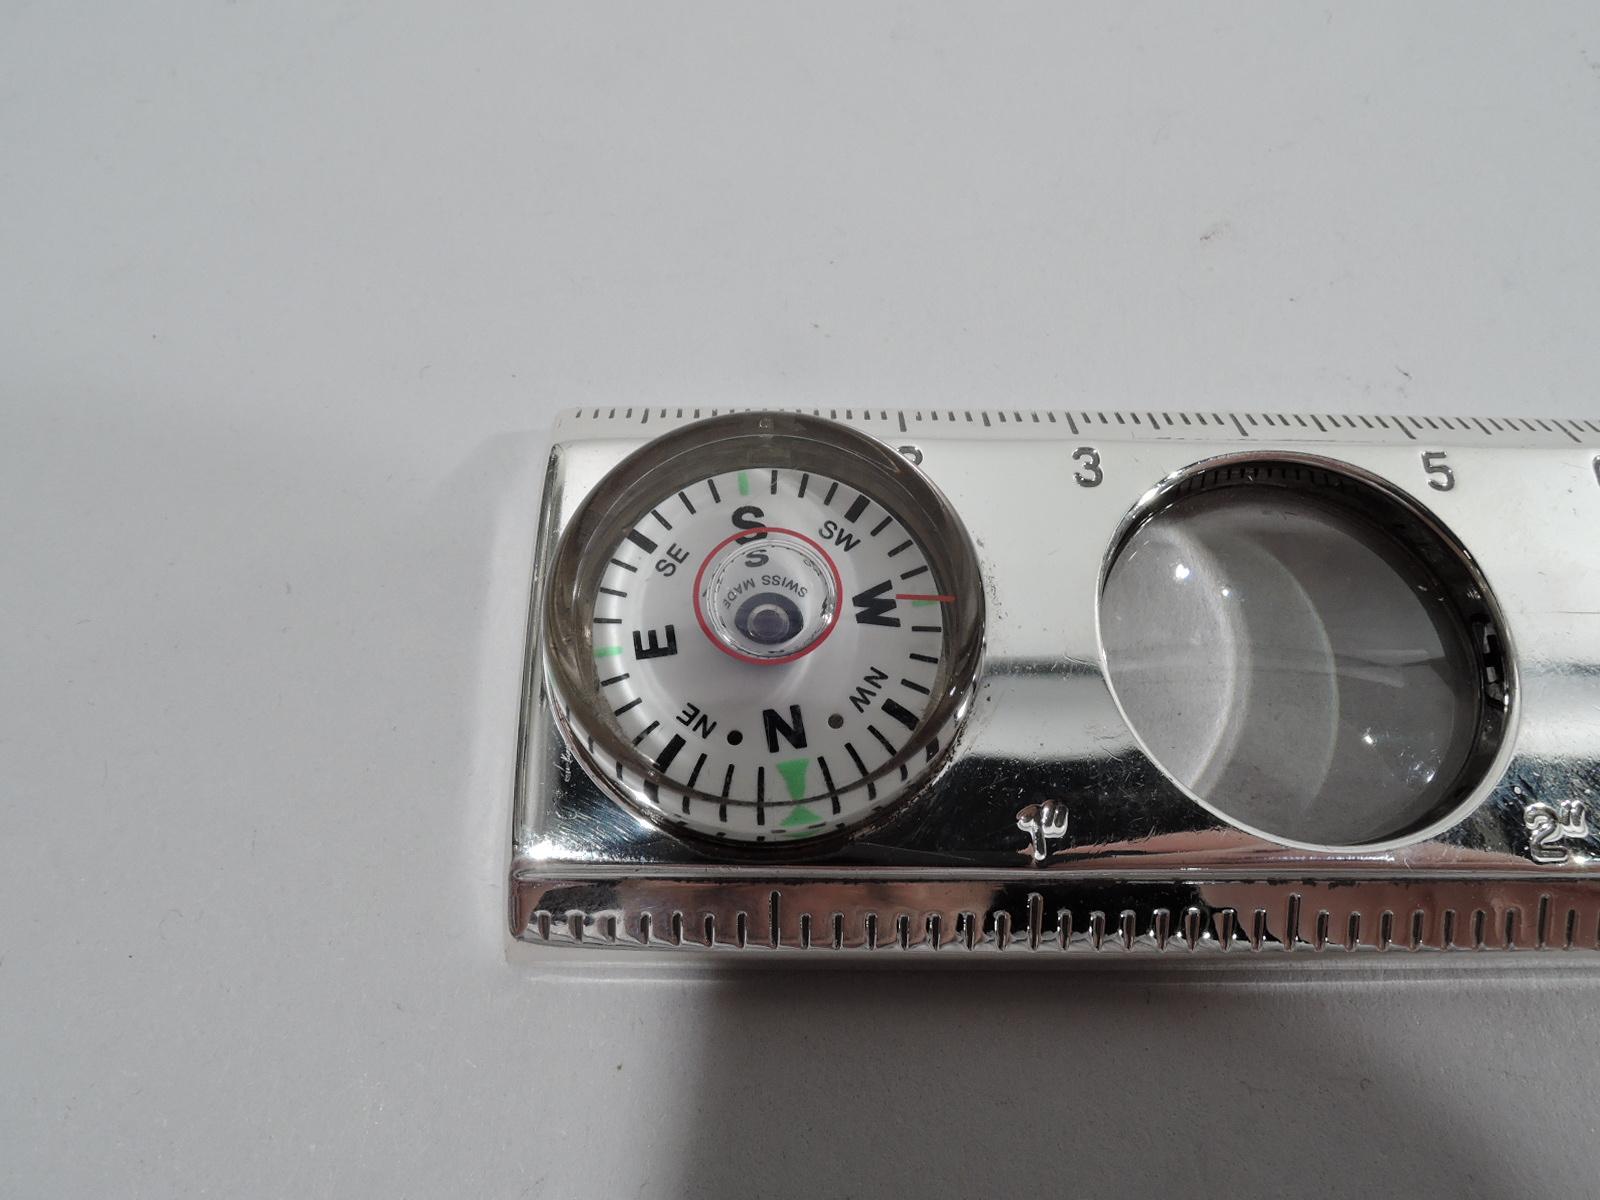 Portable multipurpose measuring device. Retailed by Tiffany & Co. in New York. Double-edged ruler in inches and centimeters inset with compass, magnifying glass, and thermometer. Marked “Tiffany & Co. 925”.